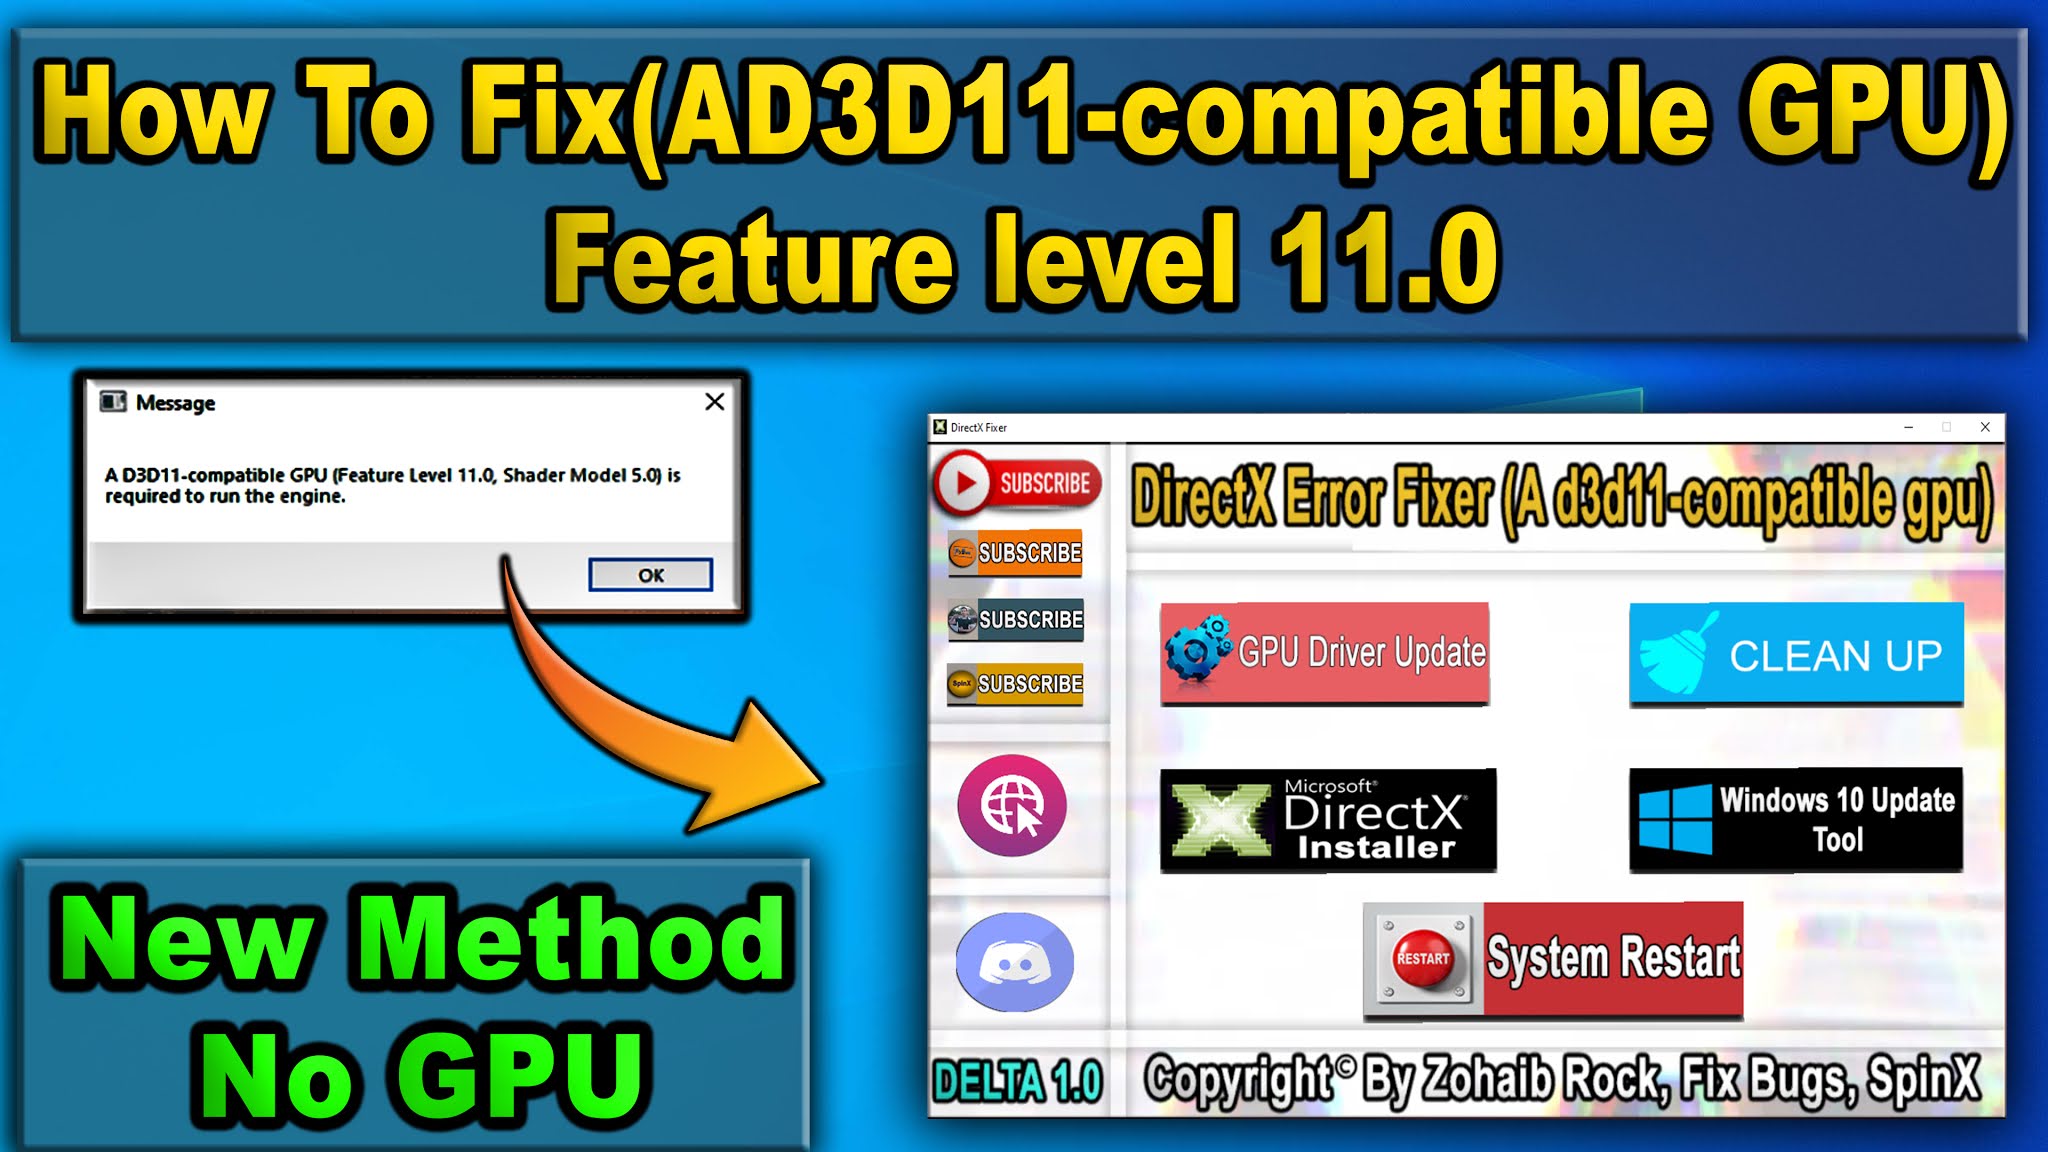 A d3d11-compatible GPU feature Level 11.0 Shader model 5.0 is required to Run the engine ФОРТНАЙТ. A d3d11-compatible GPU (feature Level 11.0, Shader model 5.0) is required to Run the engine.. A d3d11-compatible GPU (feature Level 11.0, Shader model 5.0) is required to Run the engine. Что бозночает. Rpgvxace RTP is required to Run this game.